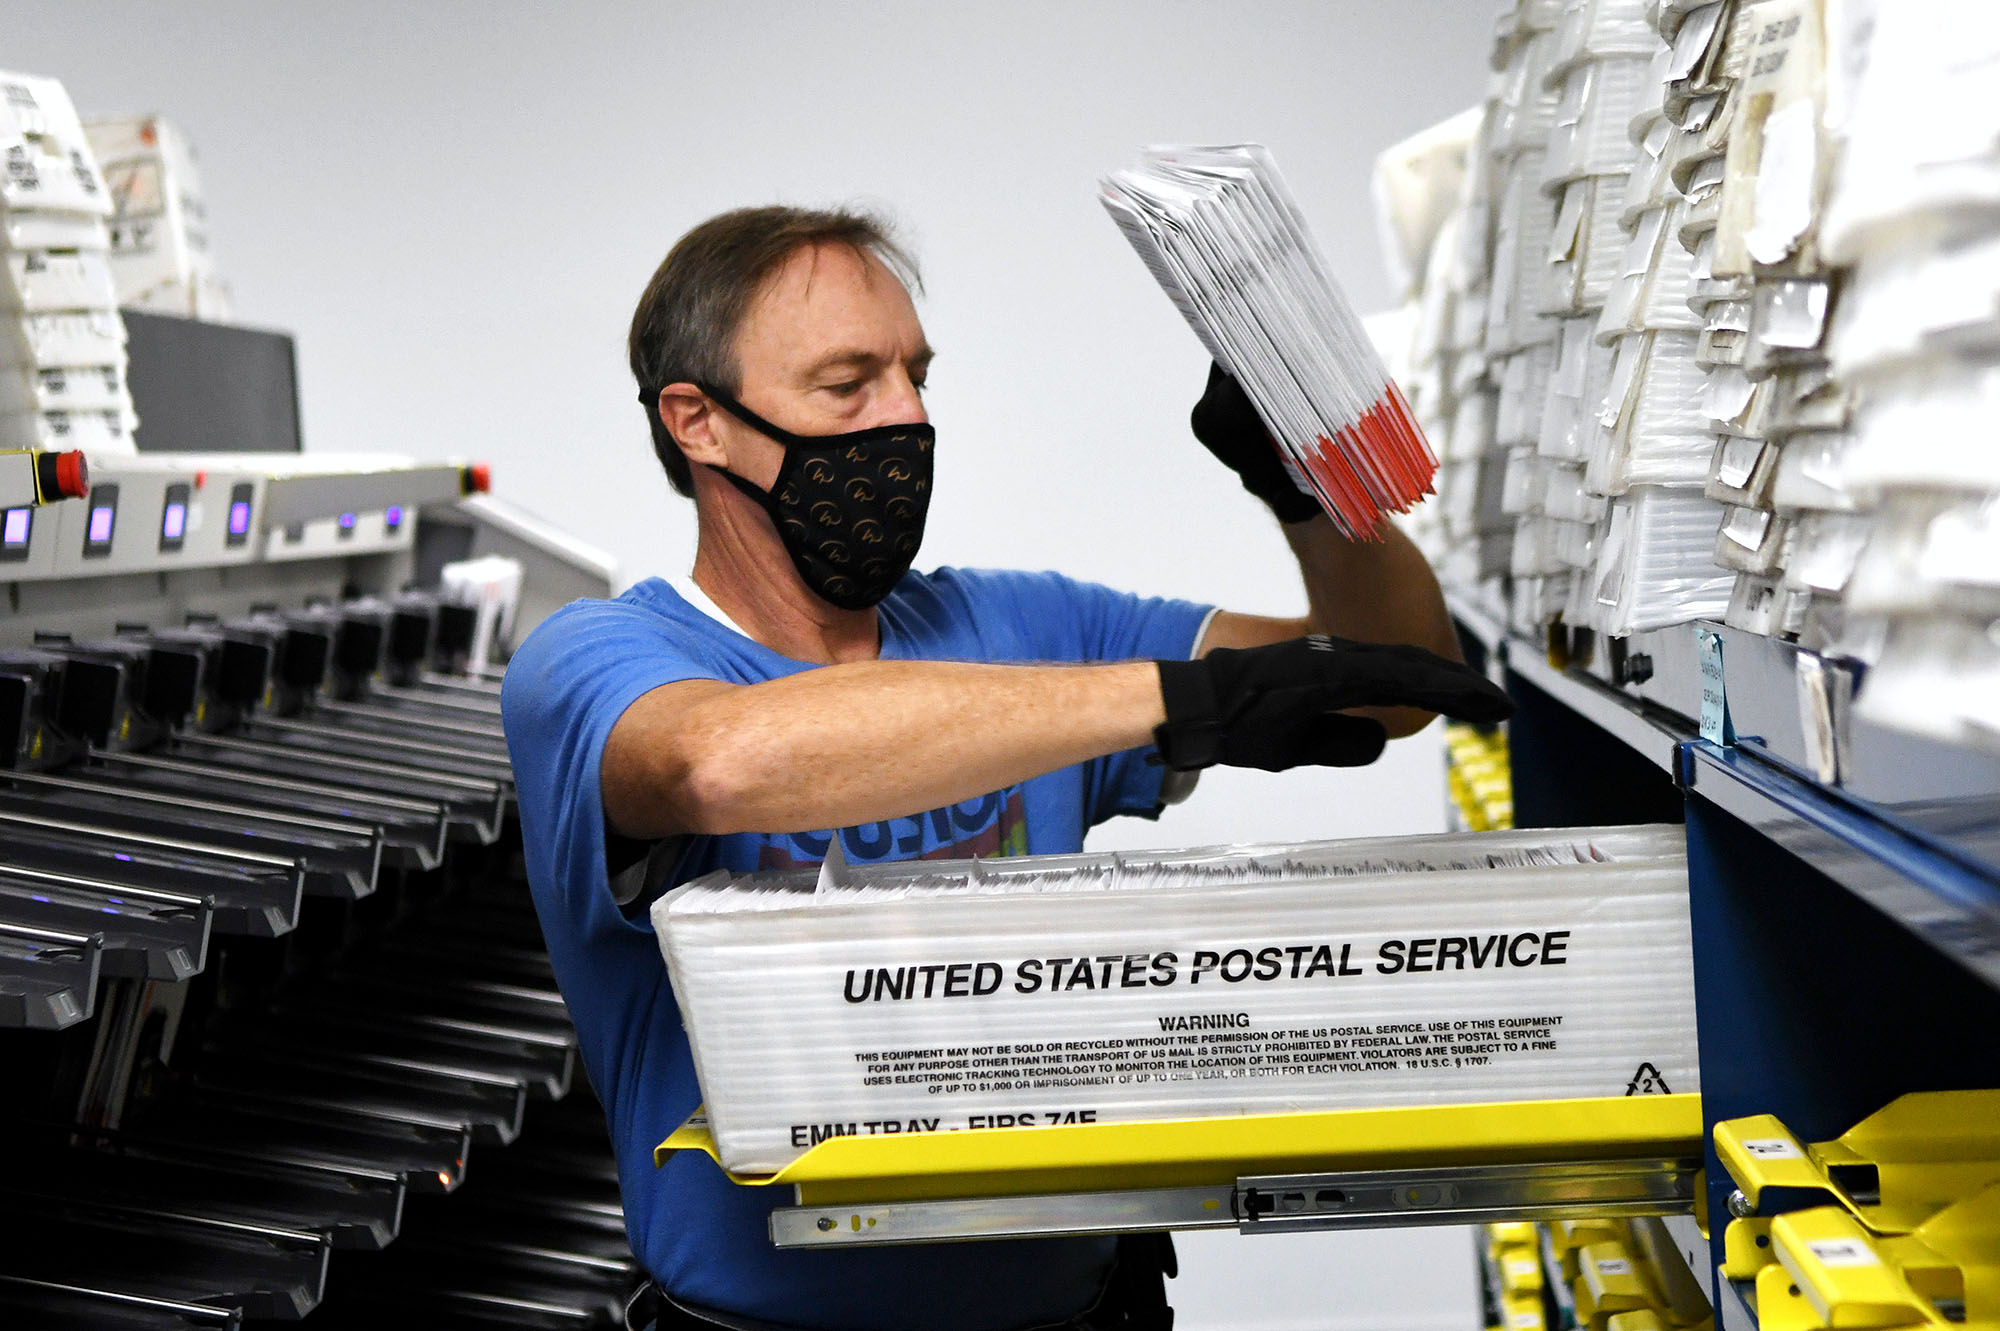 PHOTO: Michael Duve places mail-in ballots into trays in the sorting room at the Orange County Supervisor of Elections office in Orlando, Fla., Oct. 26, 2020.